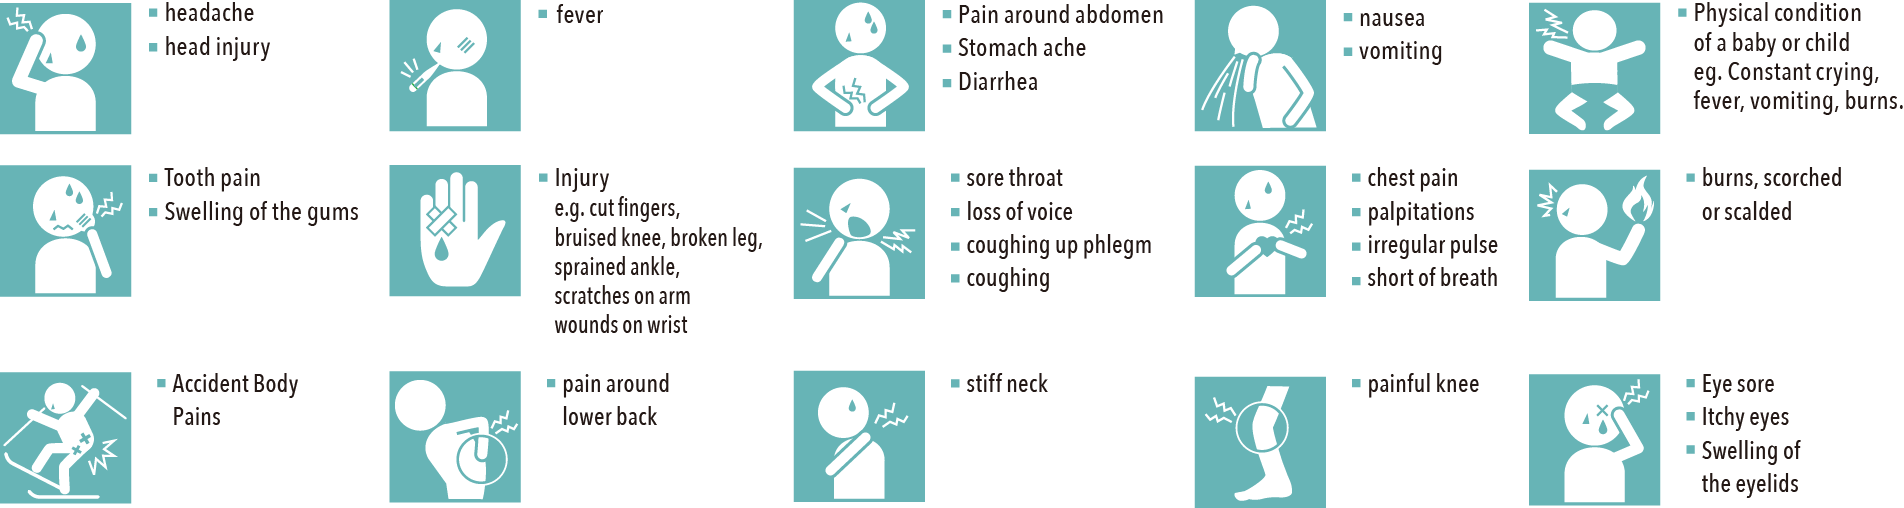 Picture for physical symptoms and their description